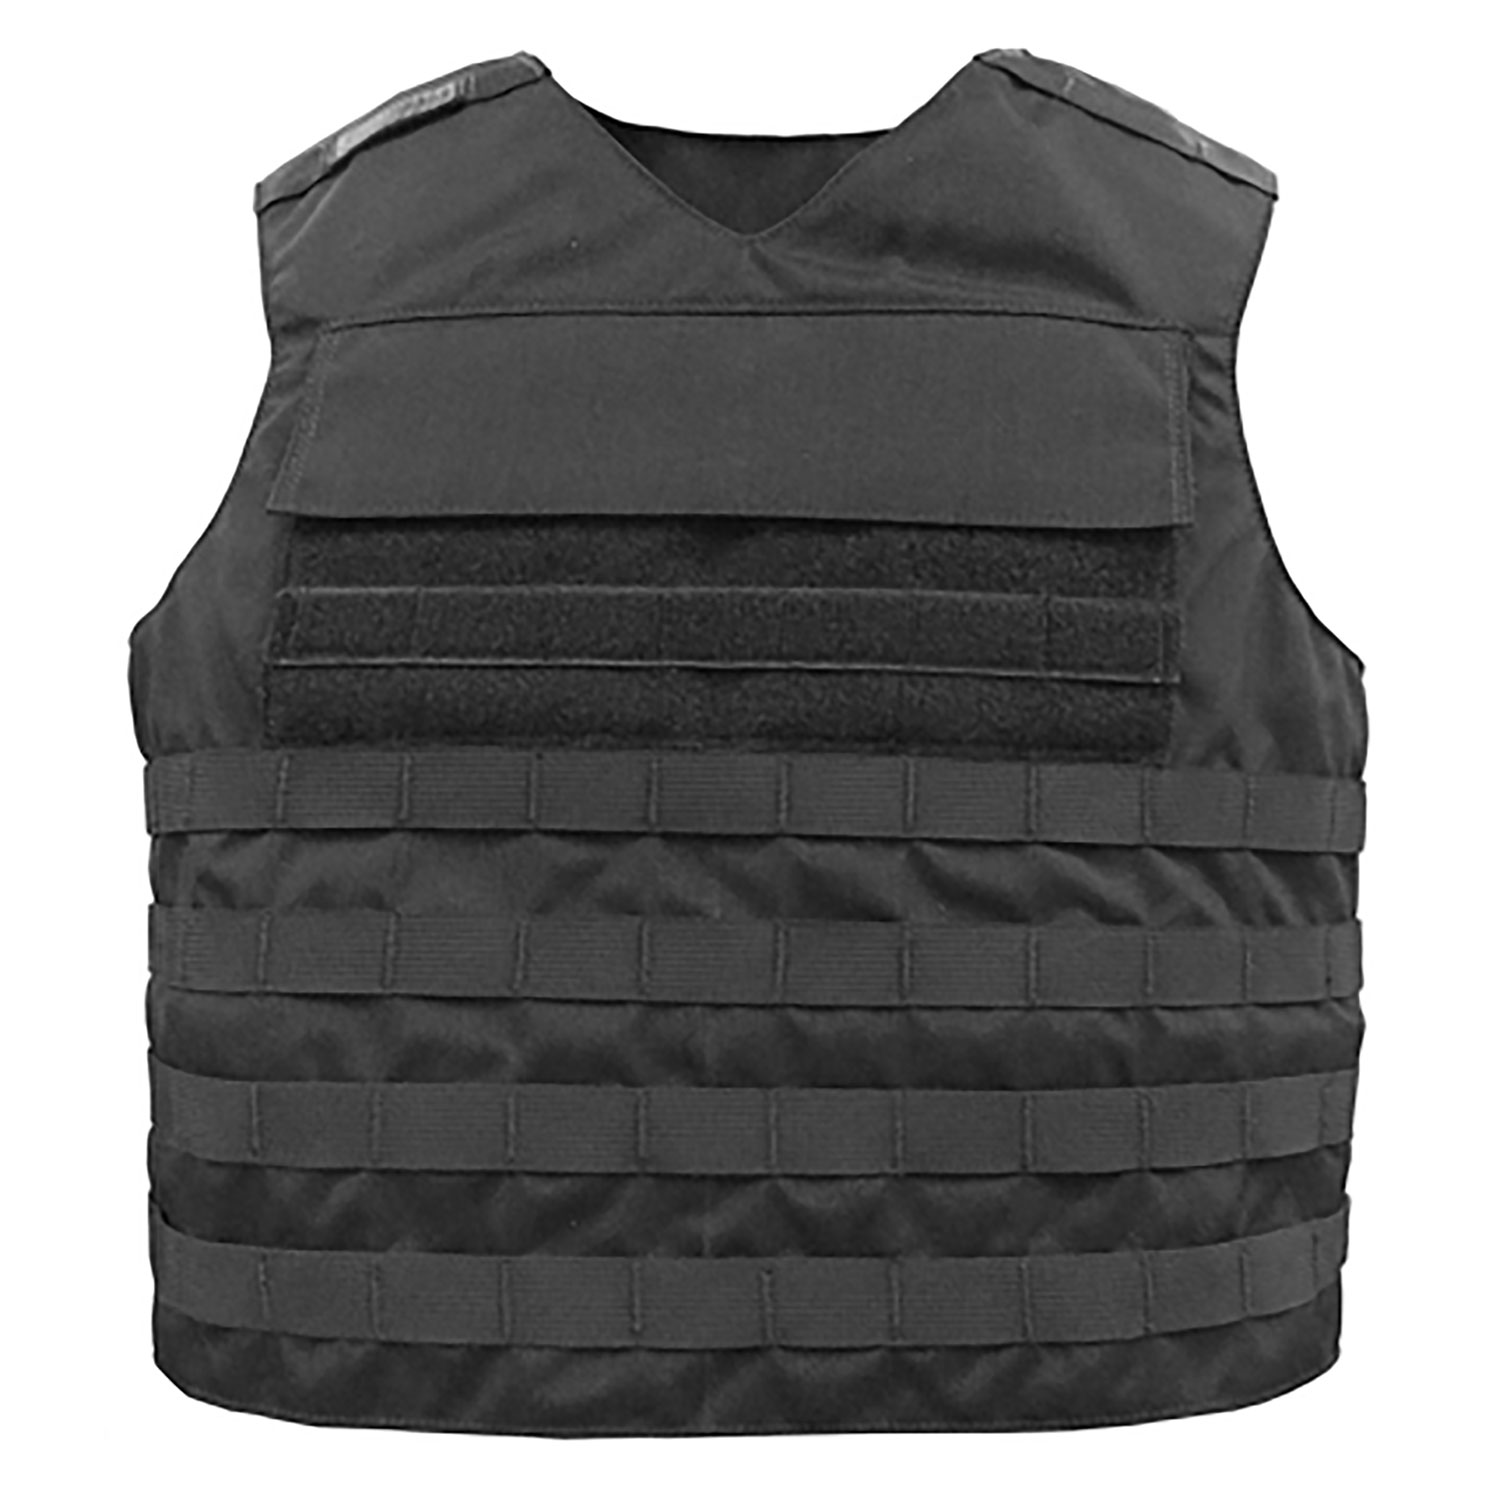 POINT BLANK R20-D TACTICAL CARRIER WITH MOLLE